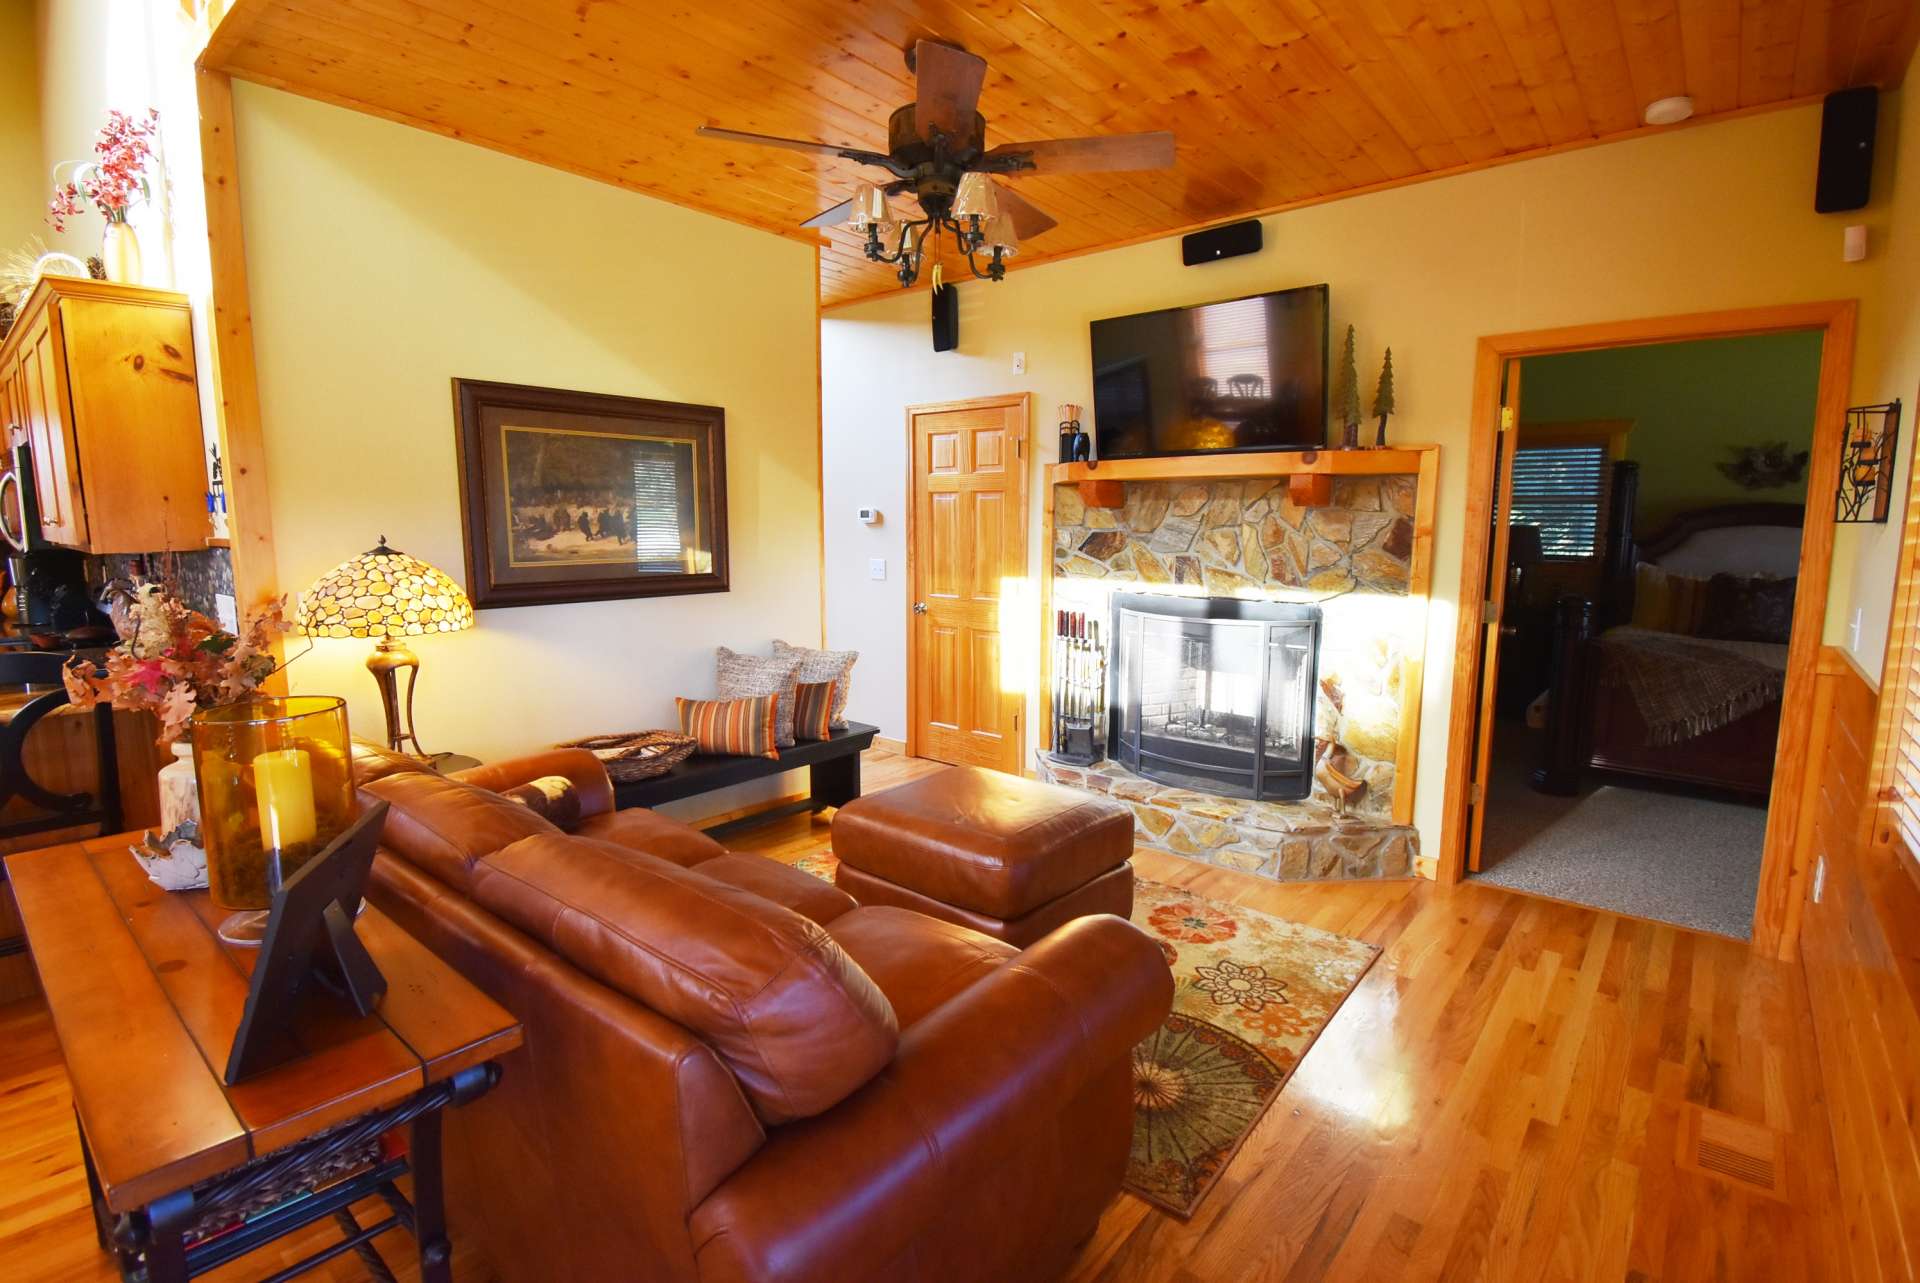 The bright vaulted great room offers gleaming wood floors, and a wood-burning fireplace for added warmth on winter evenings.